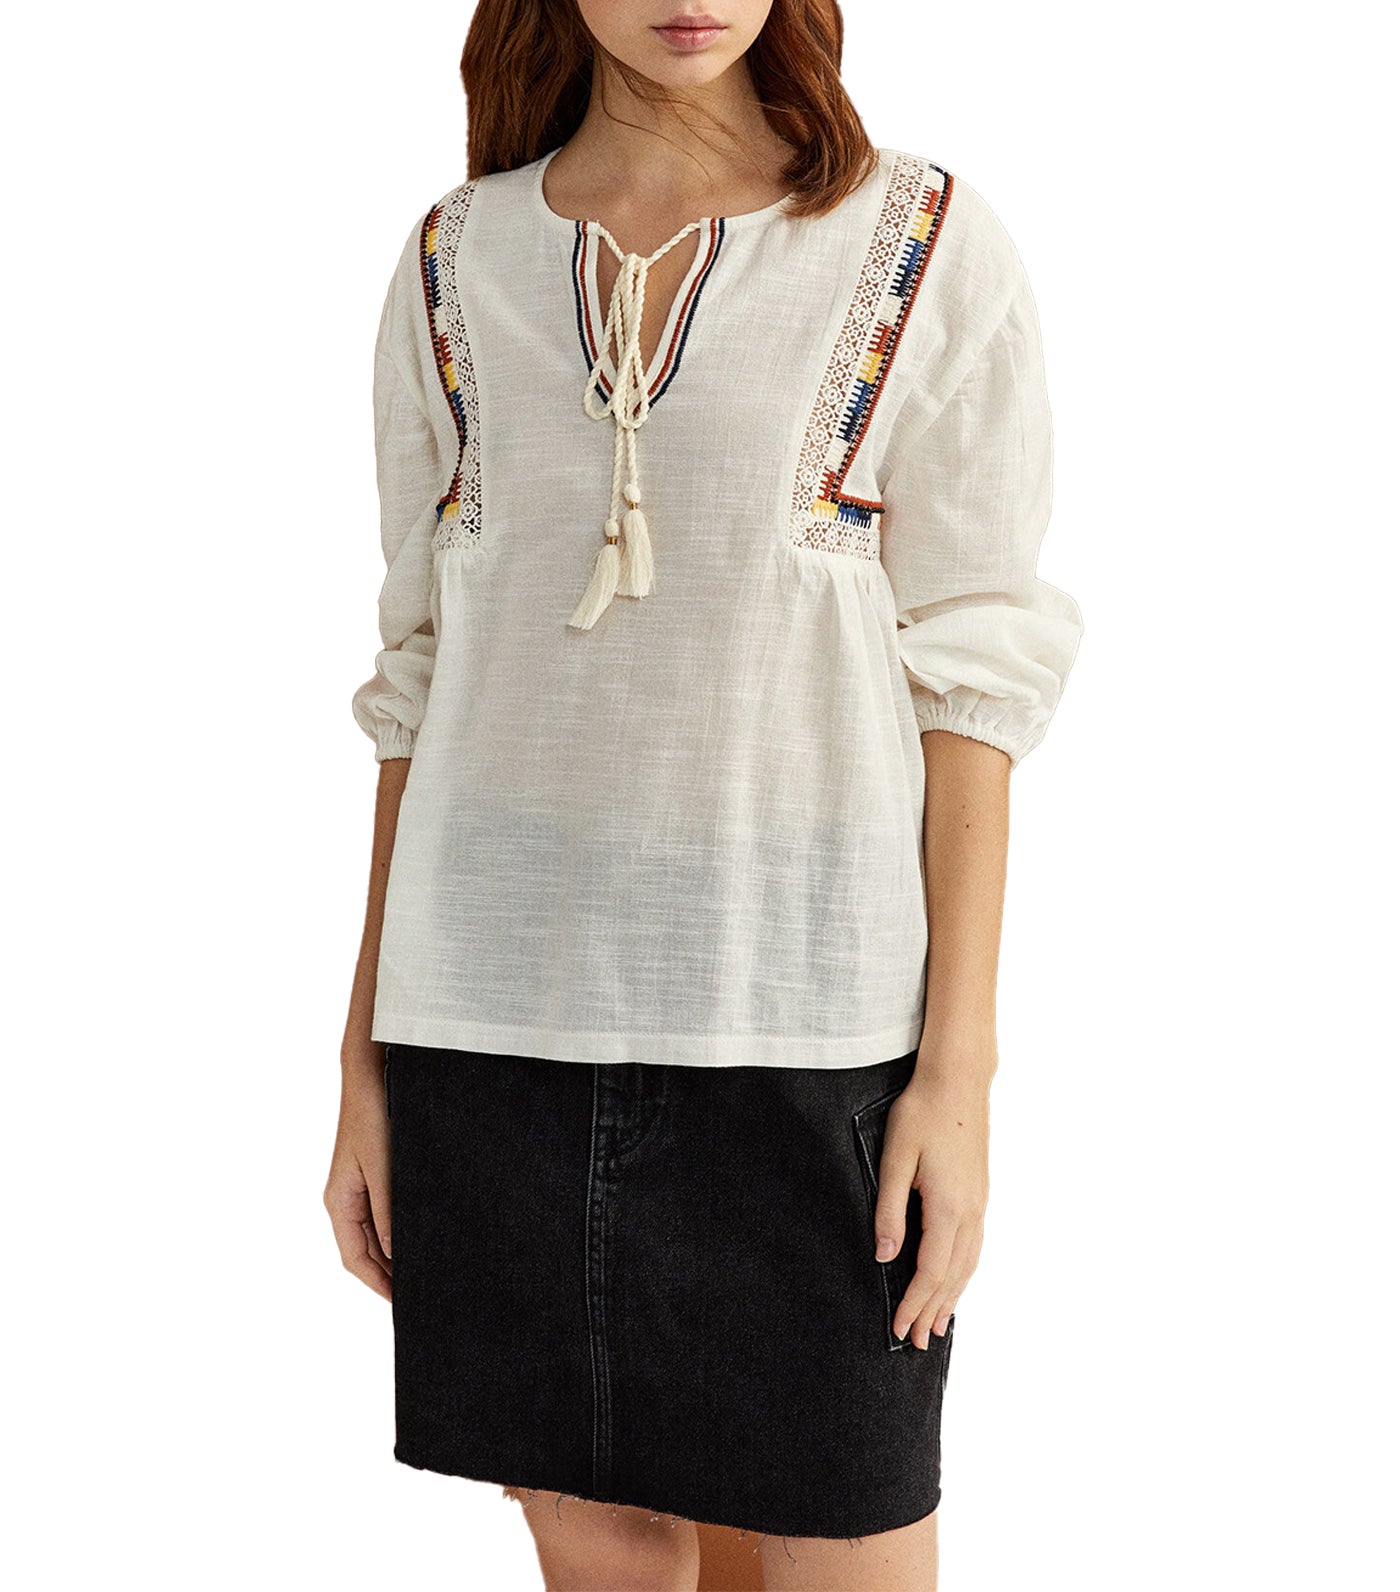 springfield embroidered lace blouse - beige